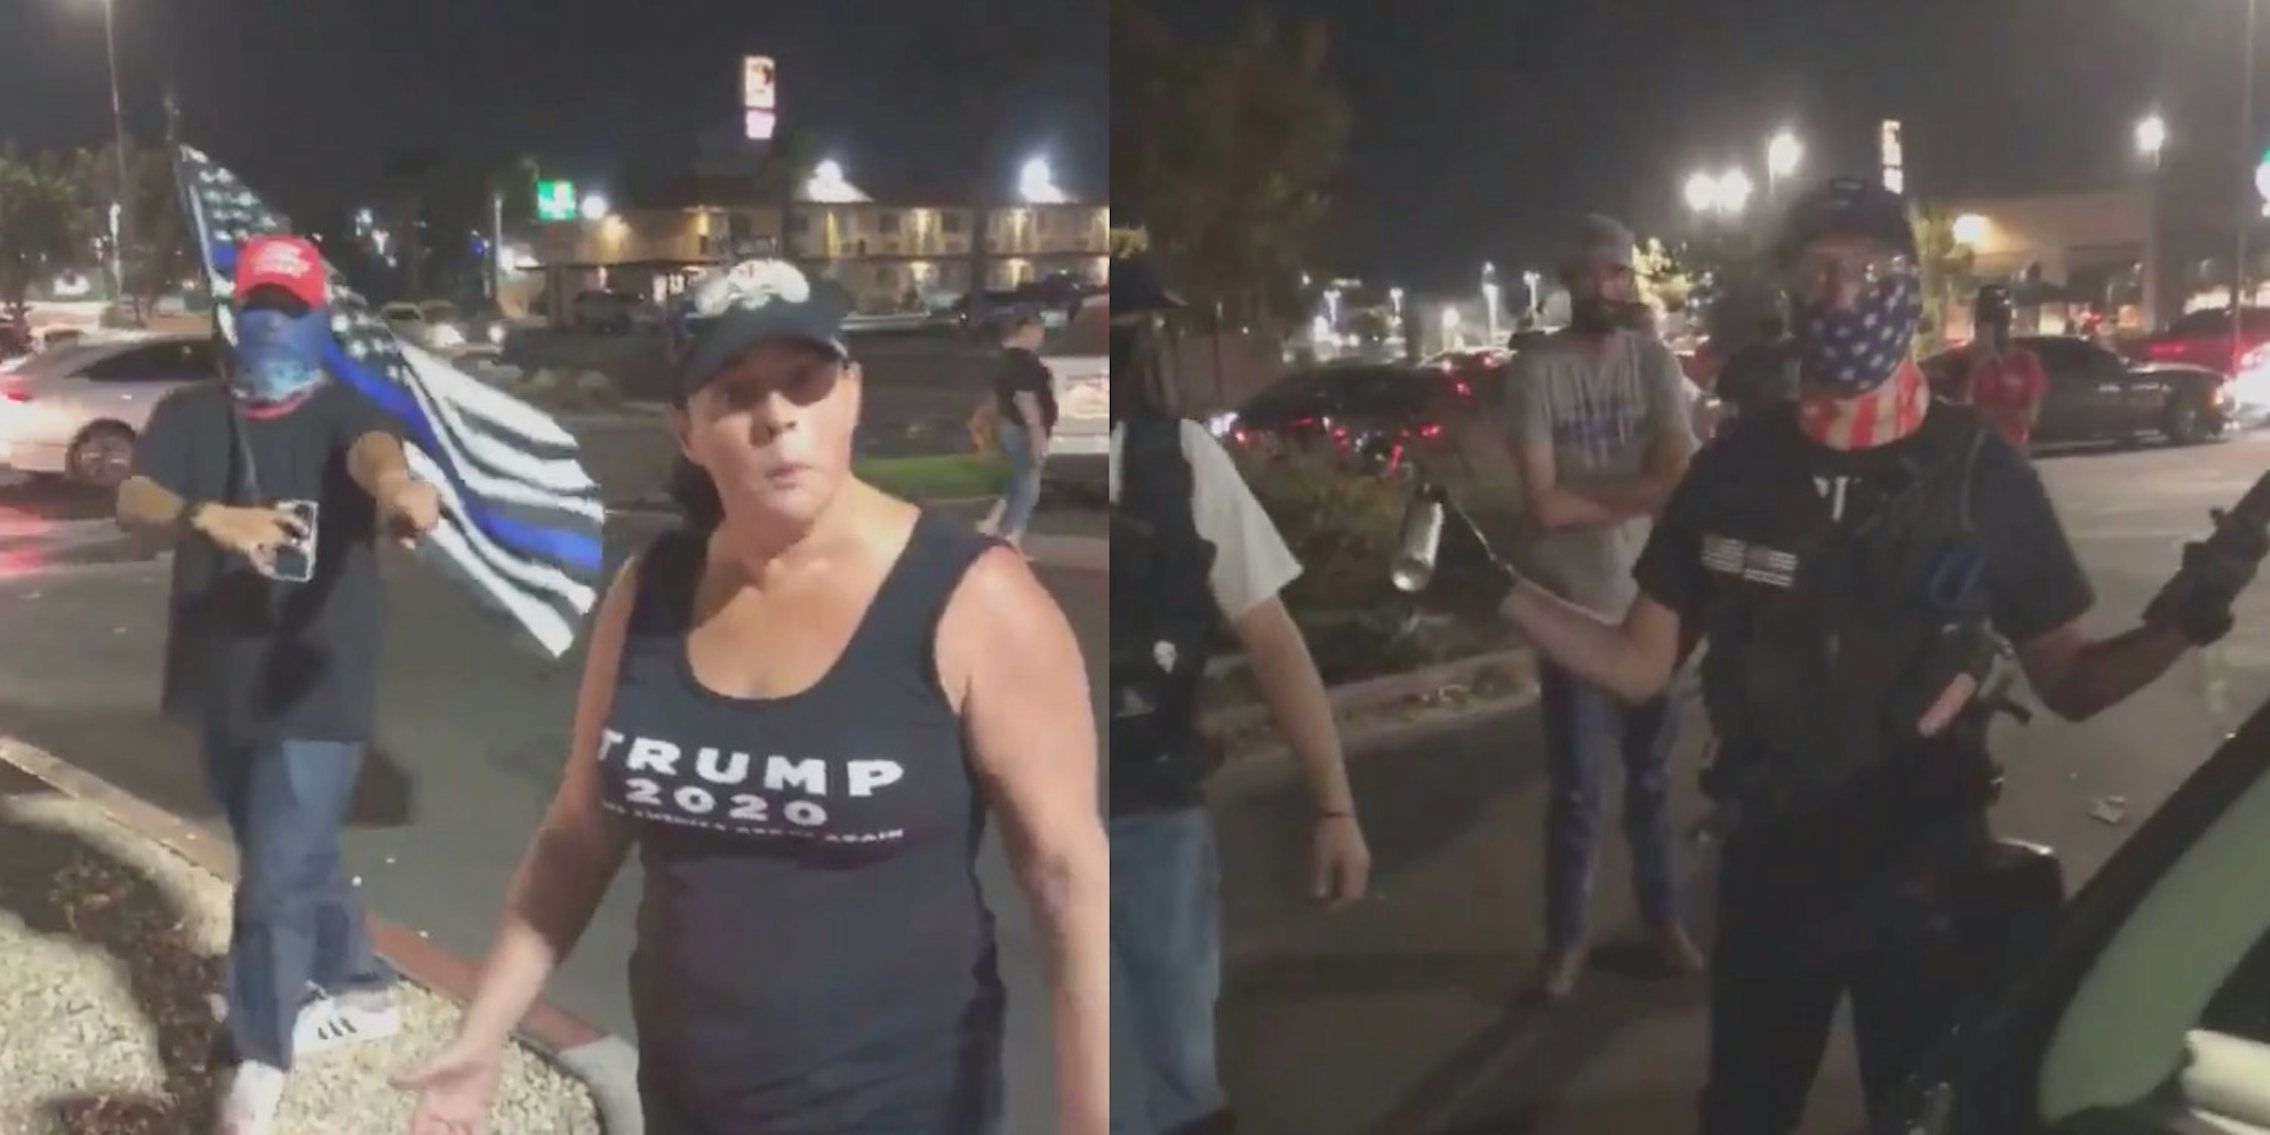 Pro-Trump supporters verbally assaulted and bear-maced a woman